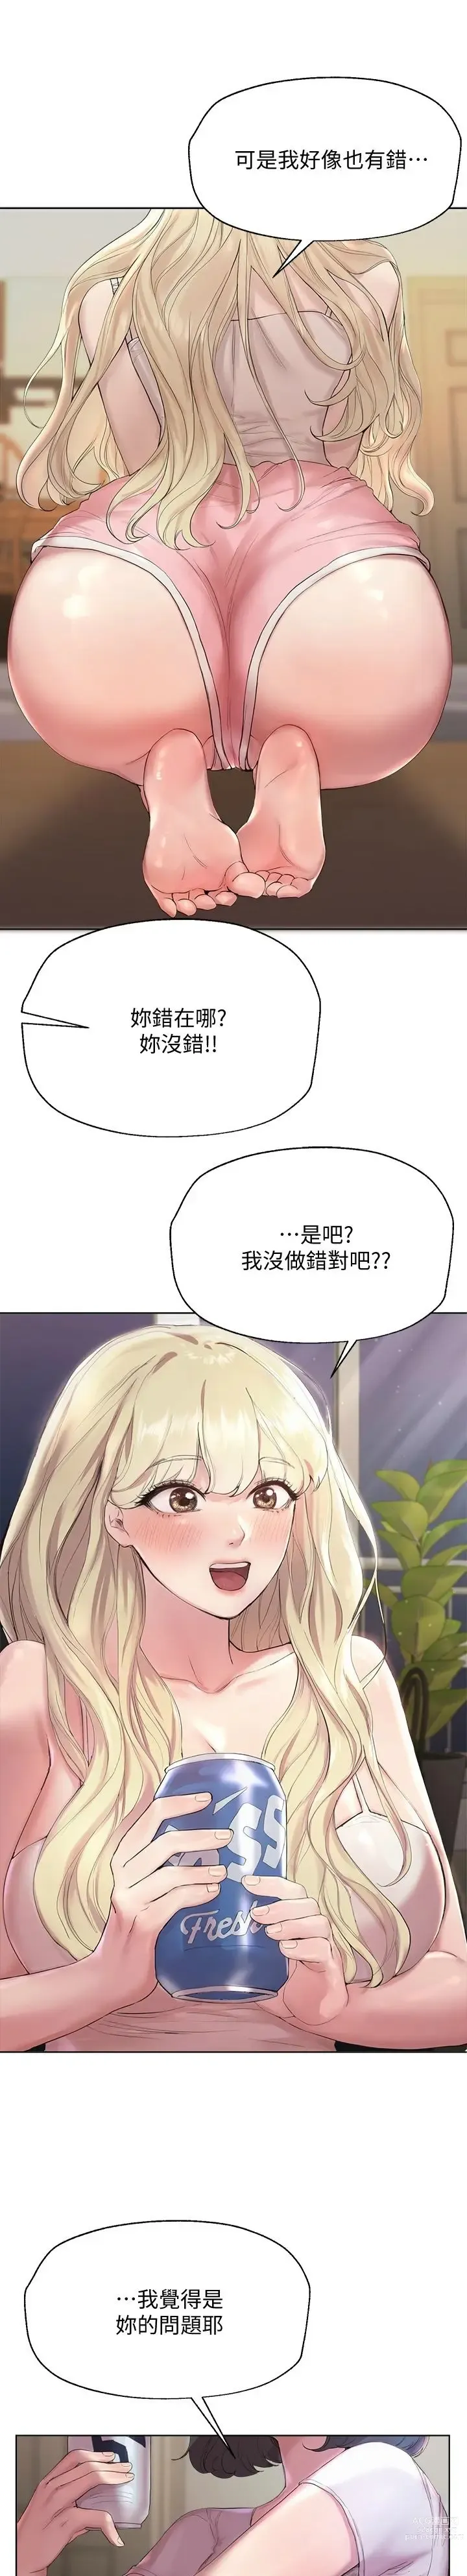 Page 4 of manga 姐姐们的调教／My Sister’s Friends